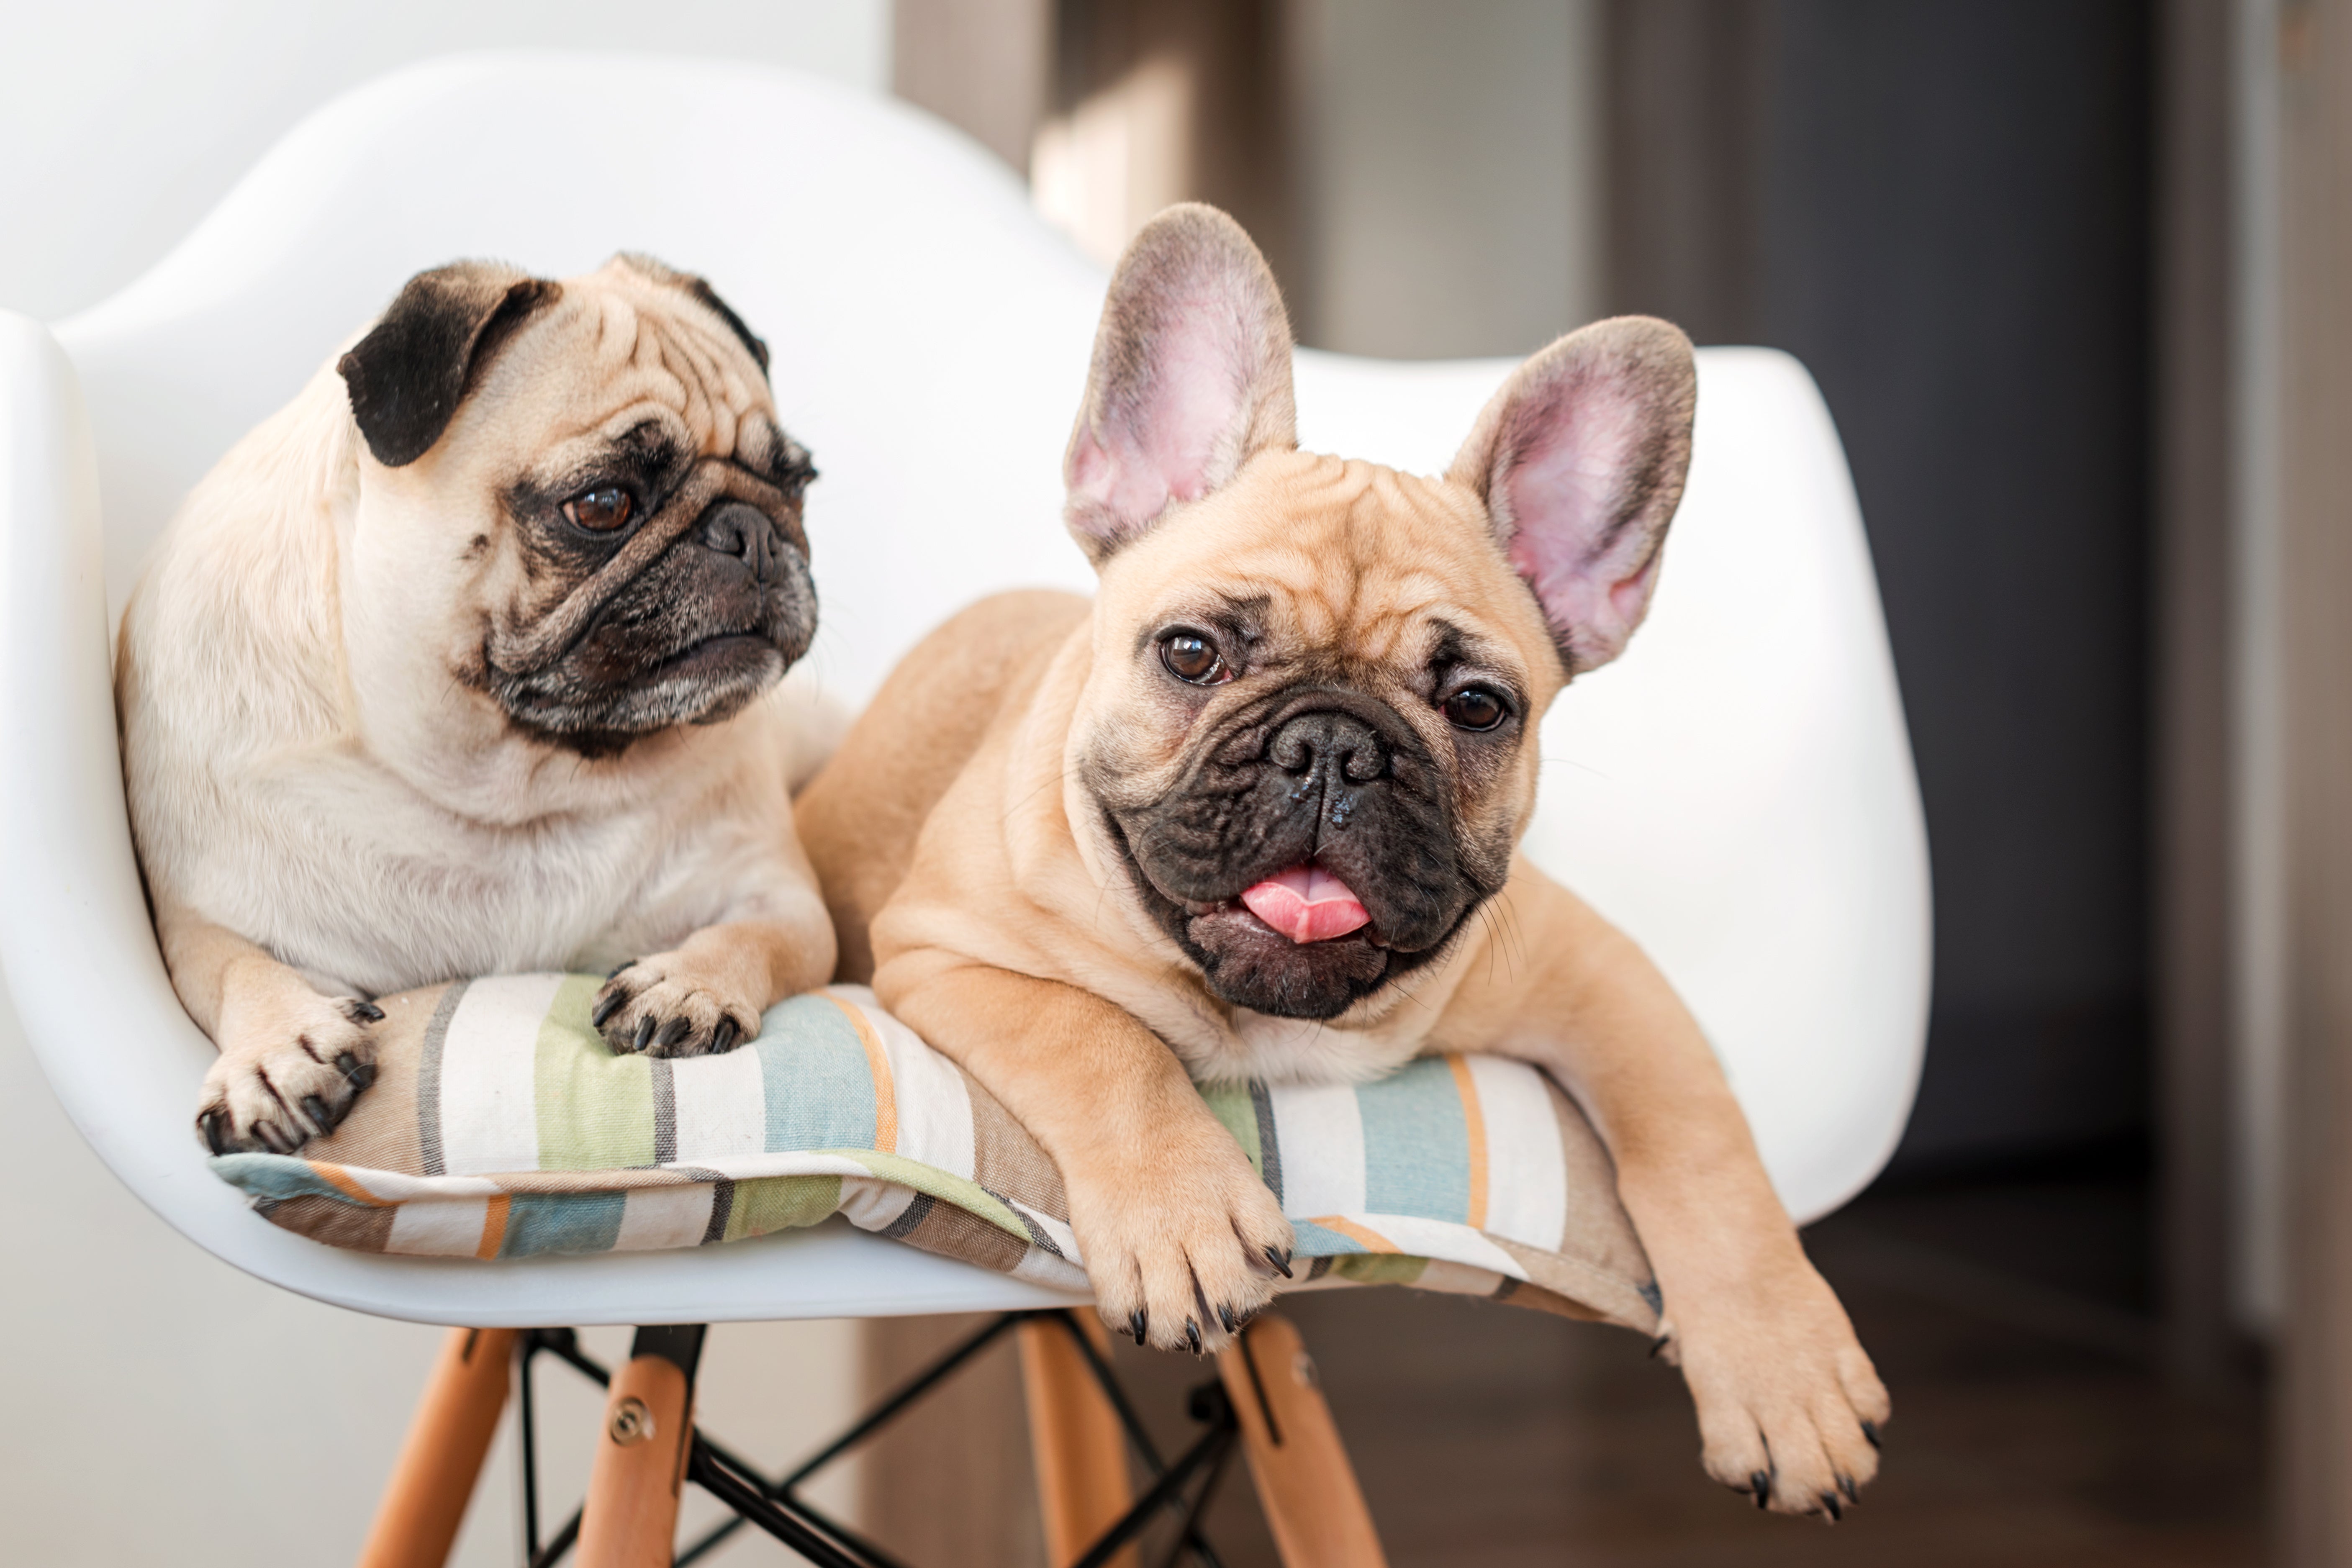 https://www.akc.org/wp-content/uploads/2021/05/French-Bulldog-and-Pug-laying-on-a-chair-together-indoors.jpeg